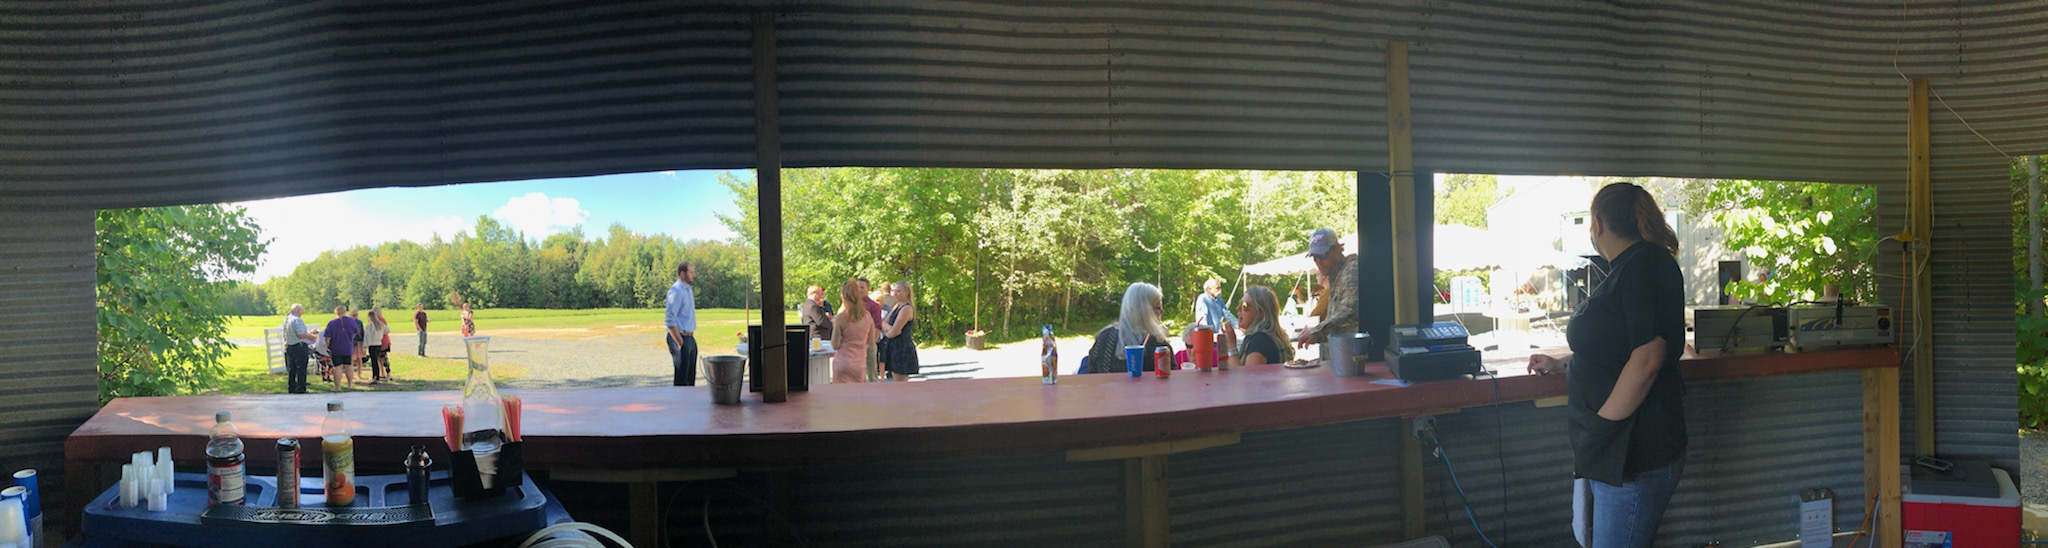 Wide angle image of an outdoor bar setting with customers engaging in conversation outside on a sunny day